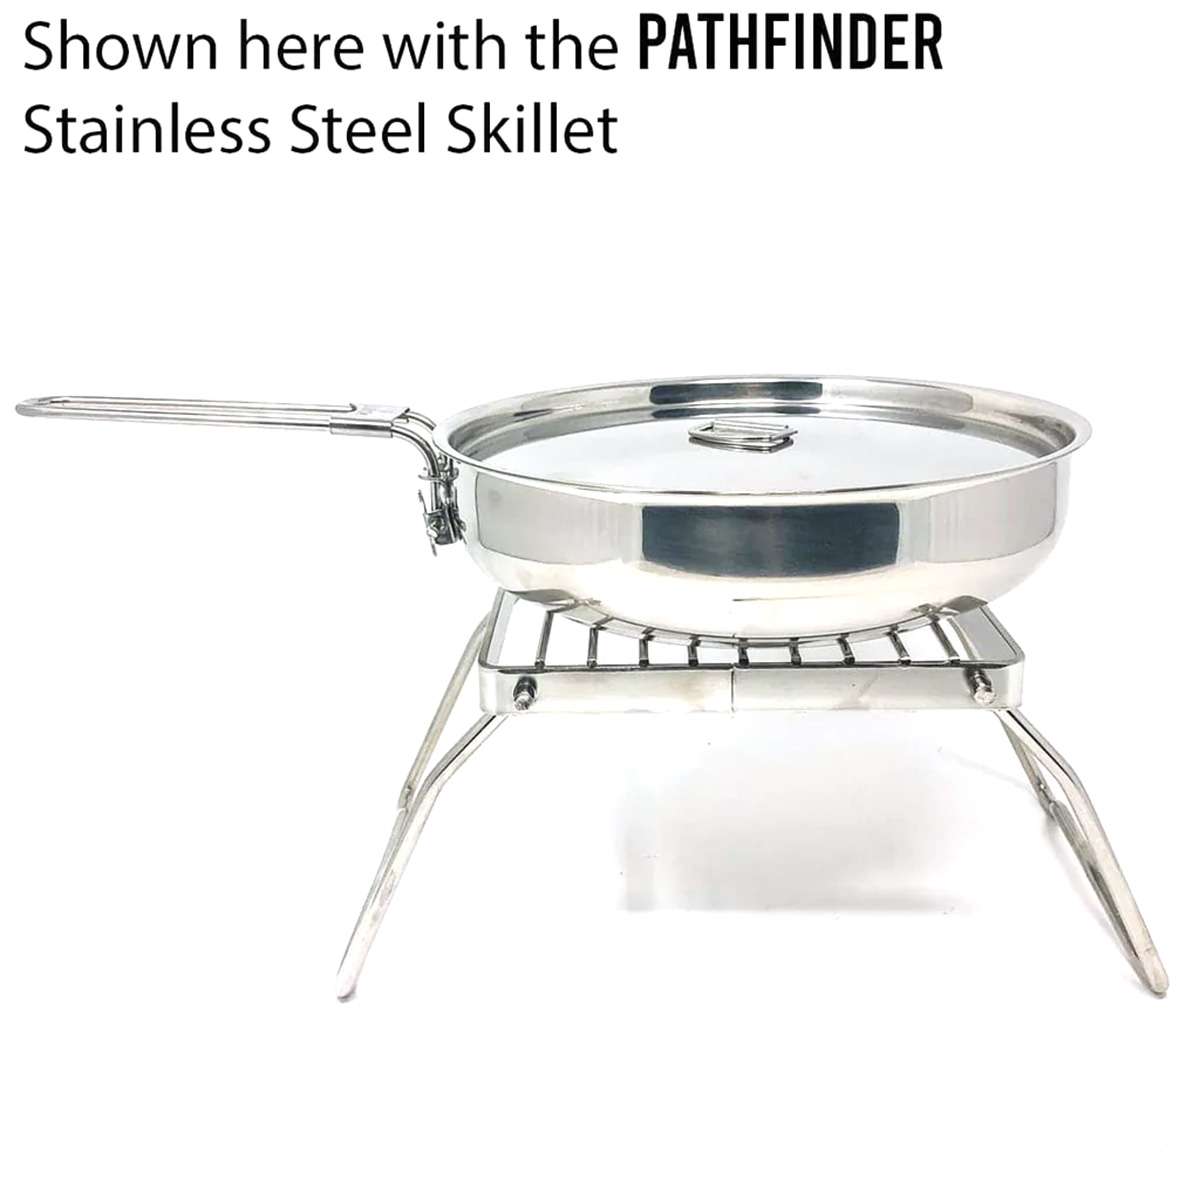 Pathfinder Stainless Steel Folding Grill